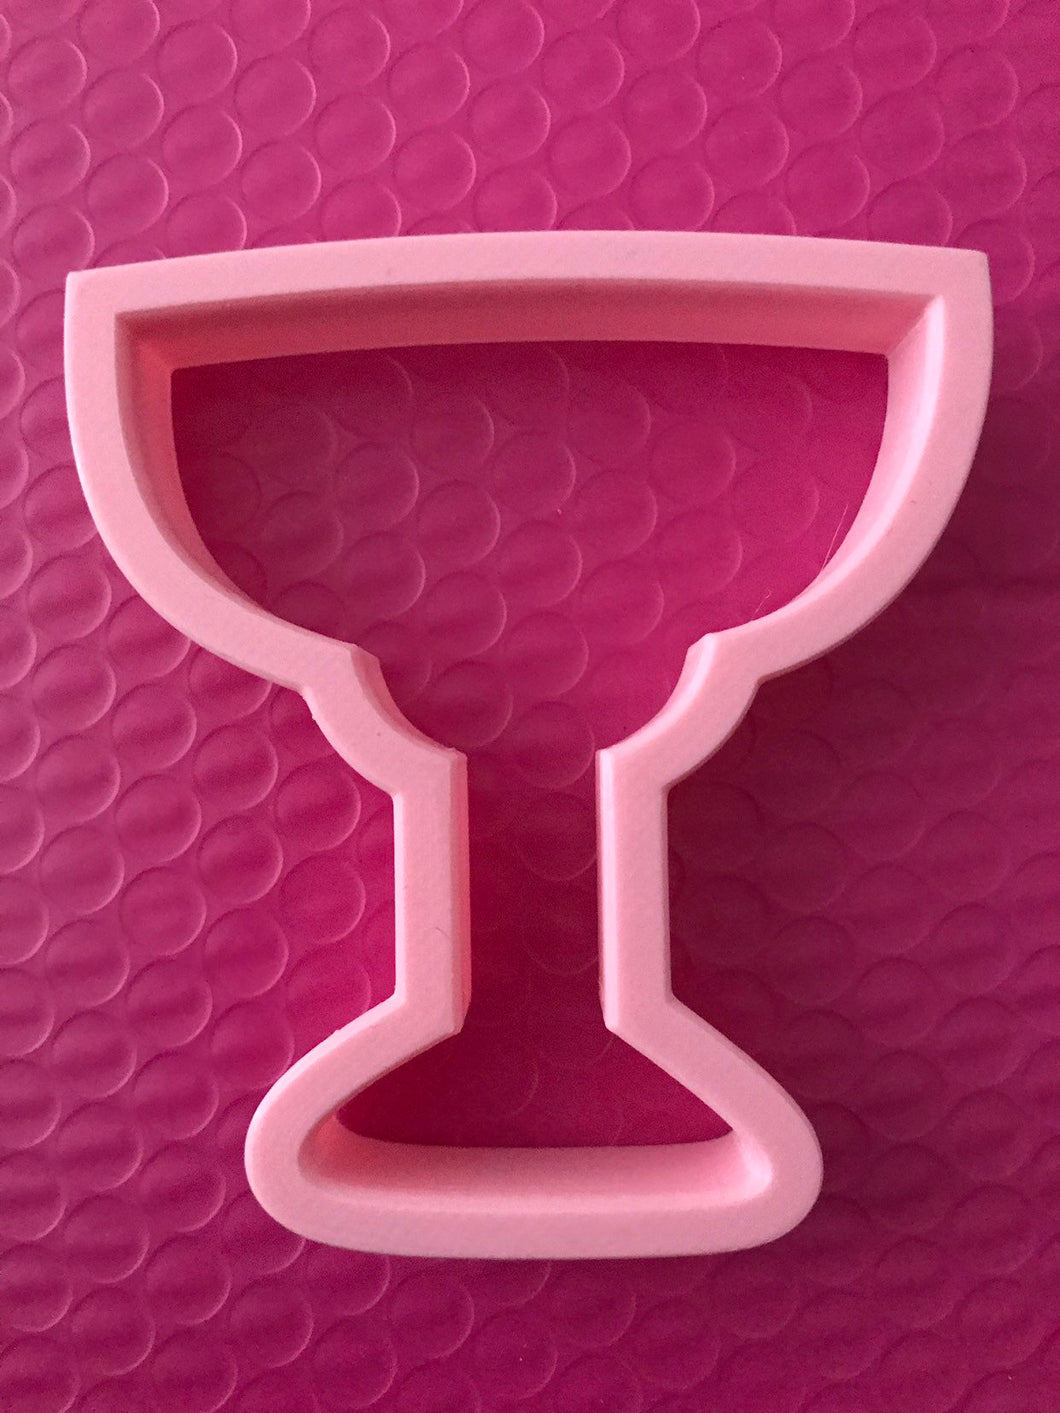 Margarita No Lime Cookie Cutter